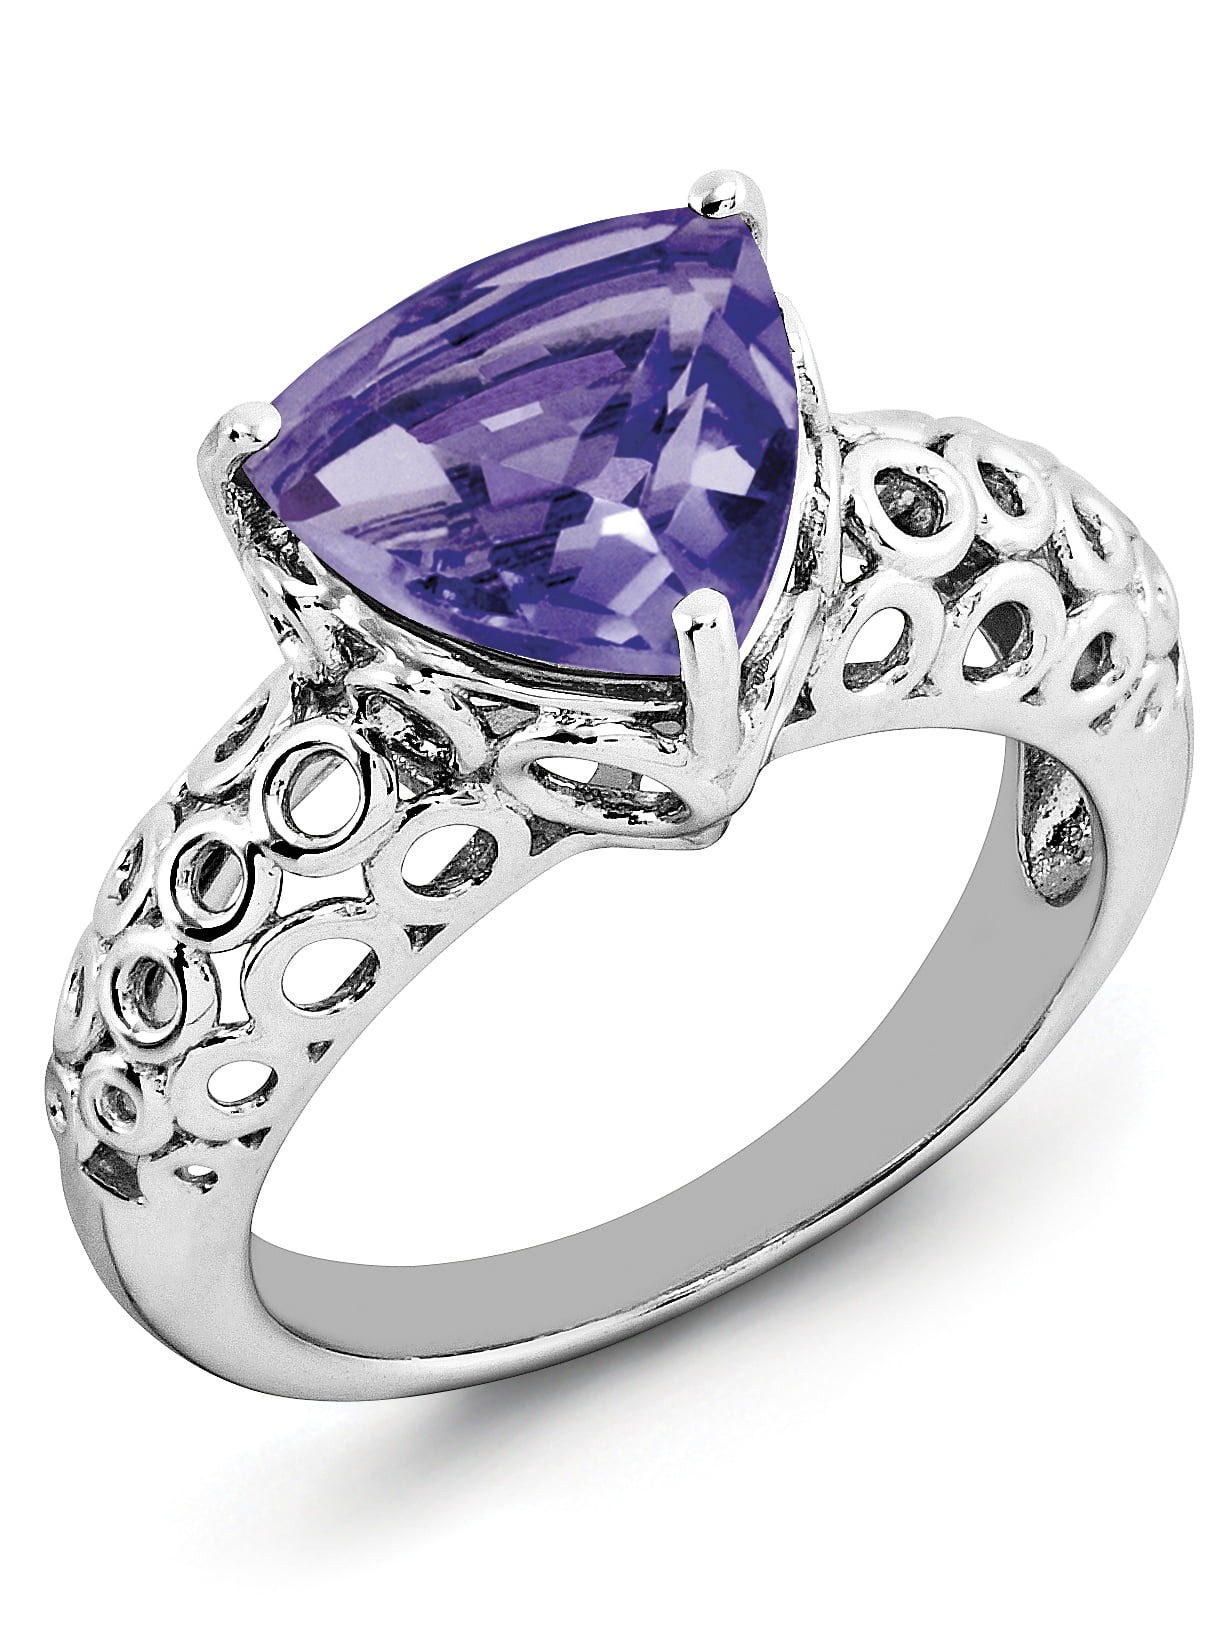 925 Sterling Silver Amethyst Solitaire Ring Jewelry Gift For Women Size 9 Ct 9.8 